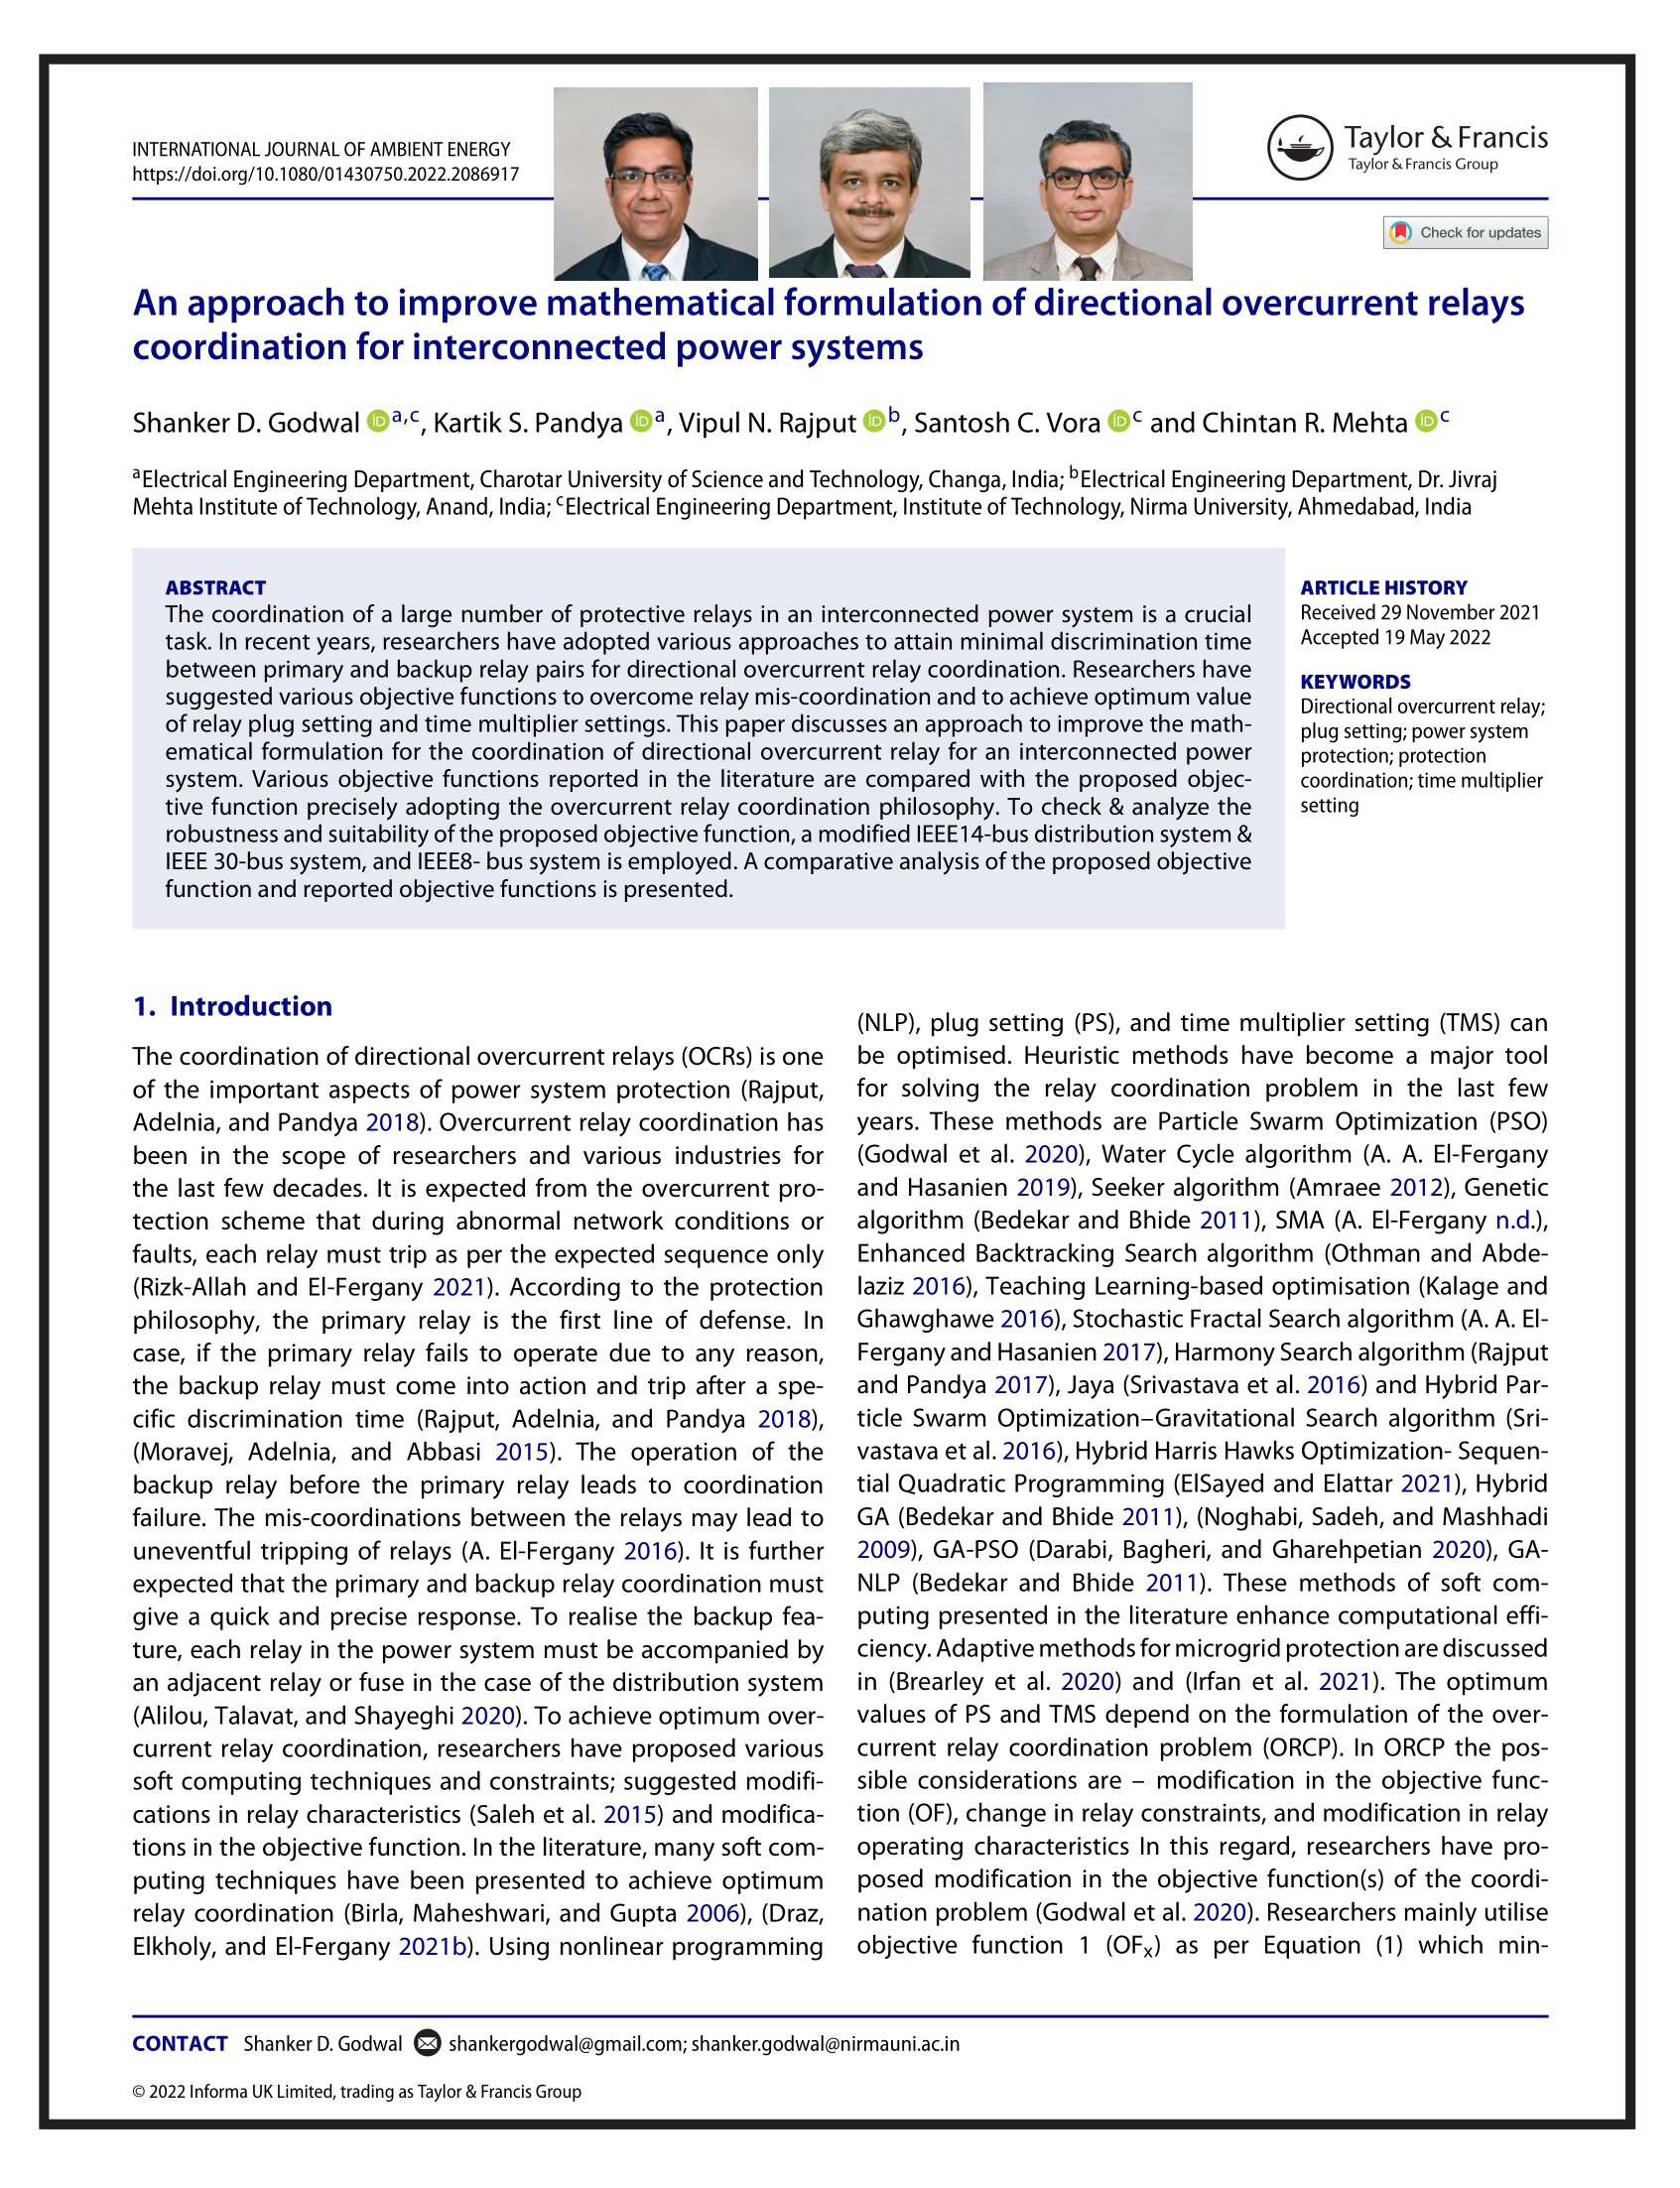 An approach to improve mathematical formulation of directional overcurrent relays coordination for interconnected power systems